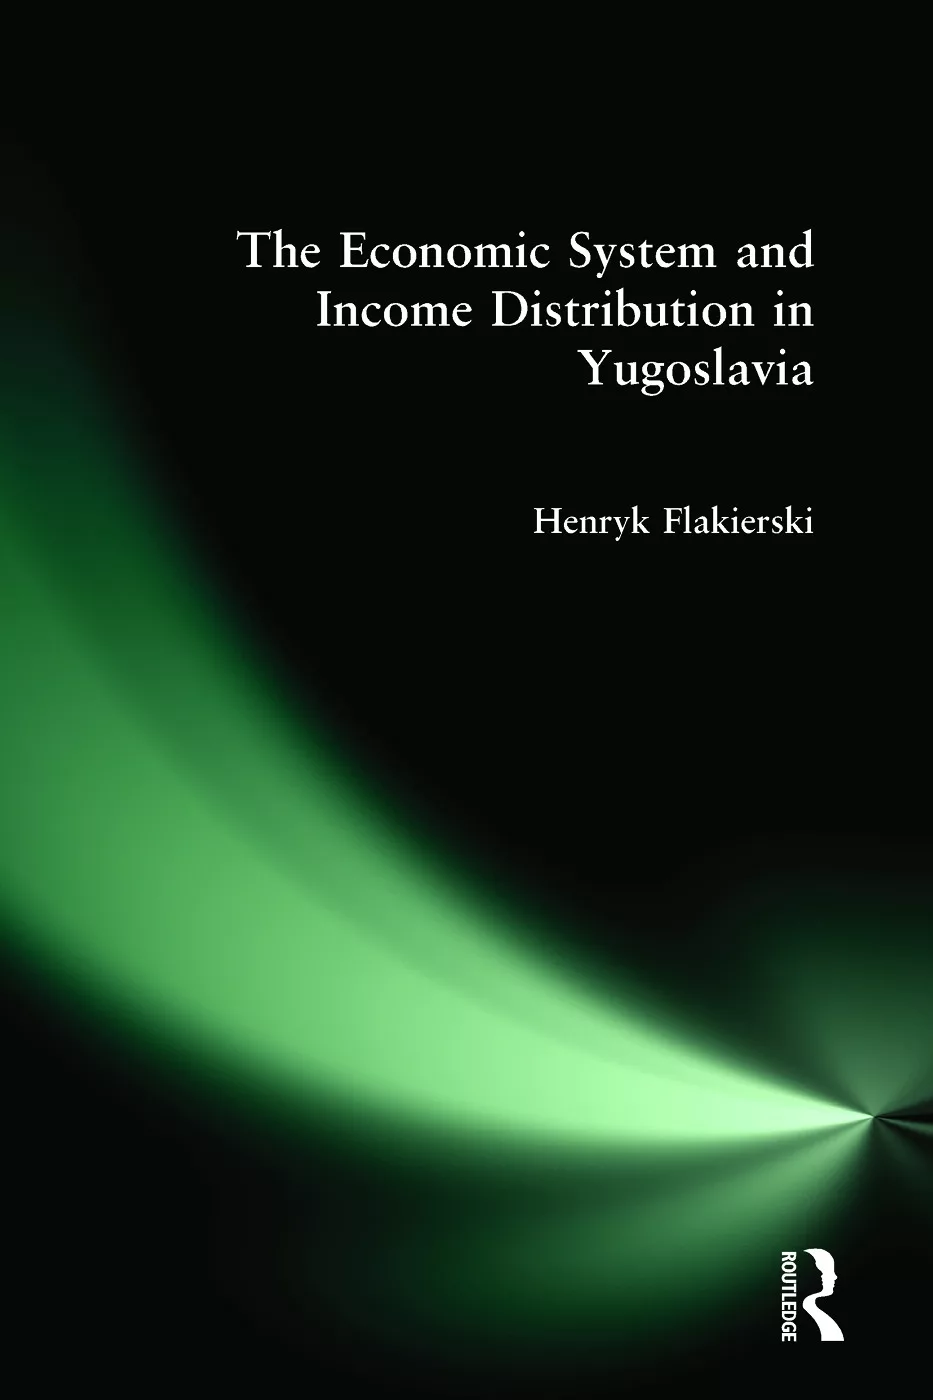 The Economic System and Income Distribution in Yugoslavia